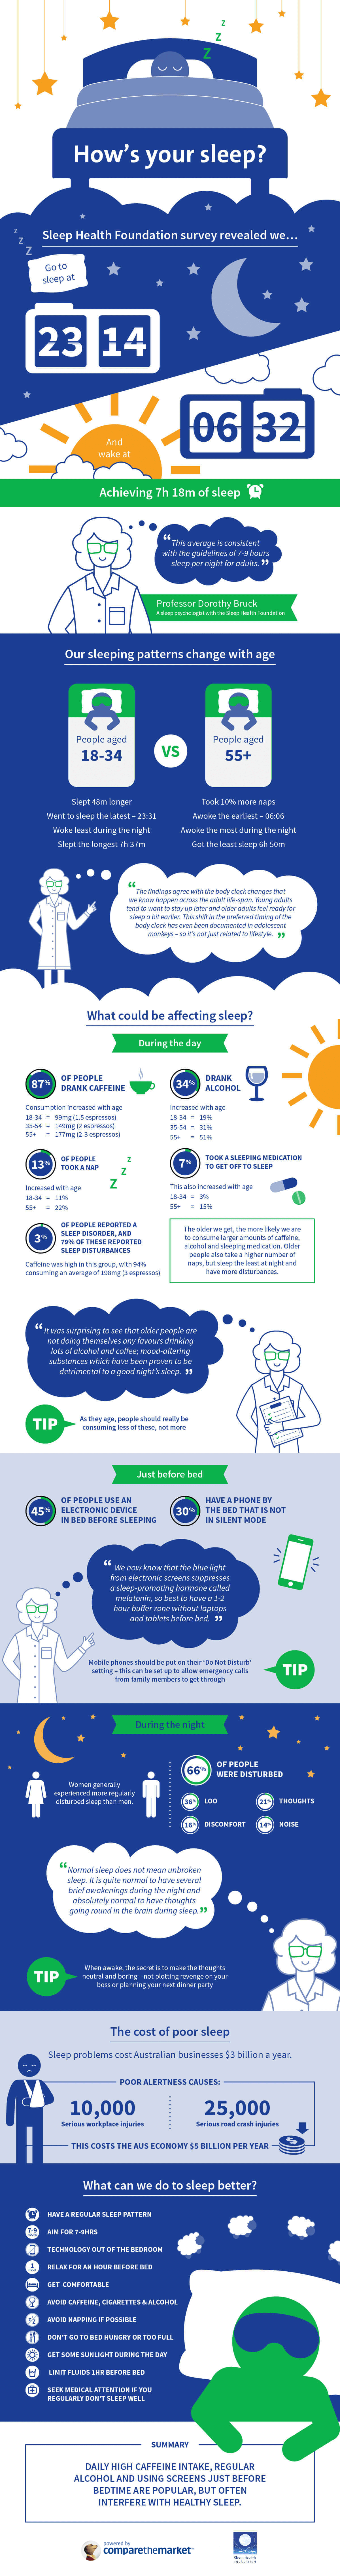 How you can get better sleep infographic